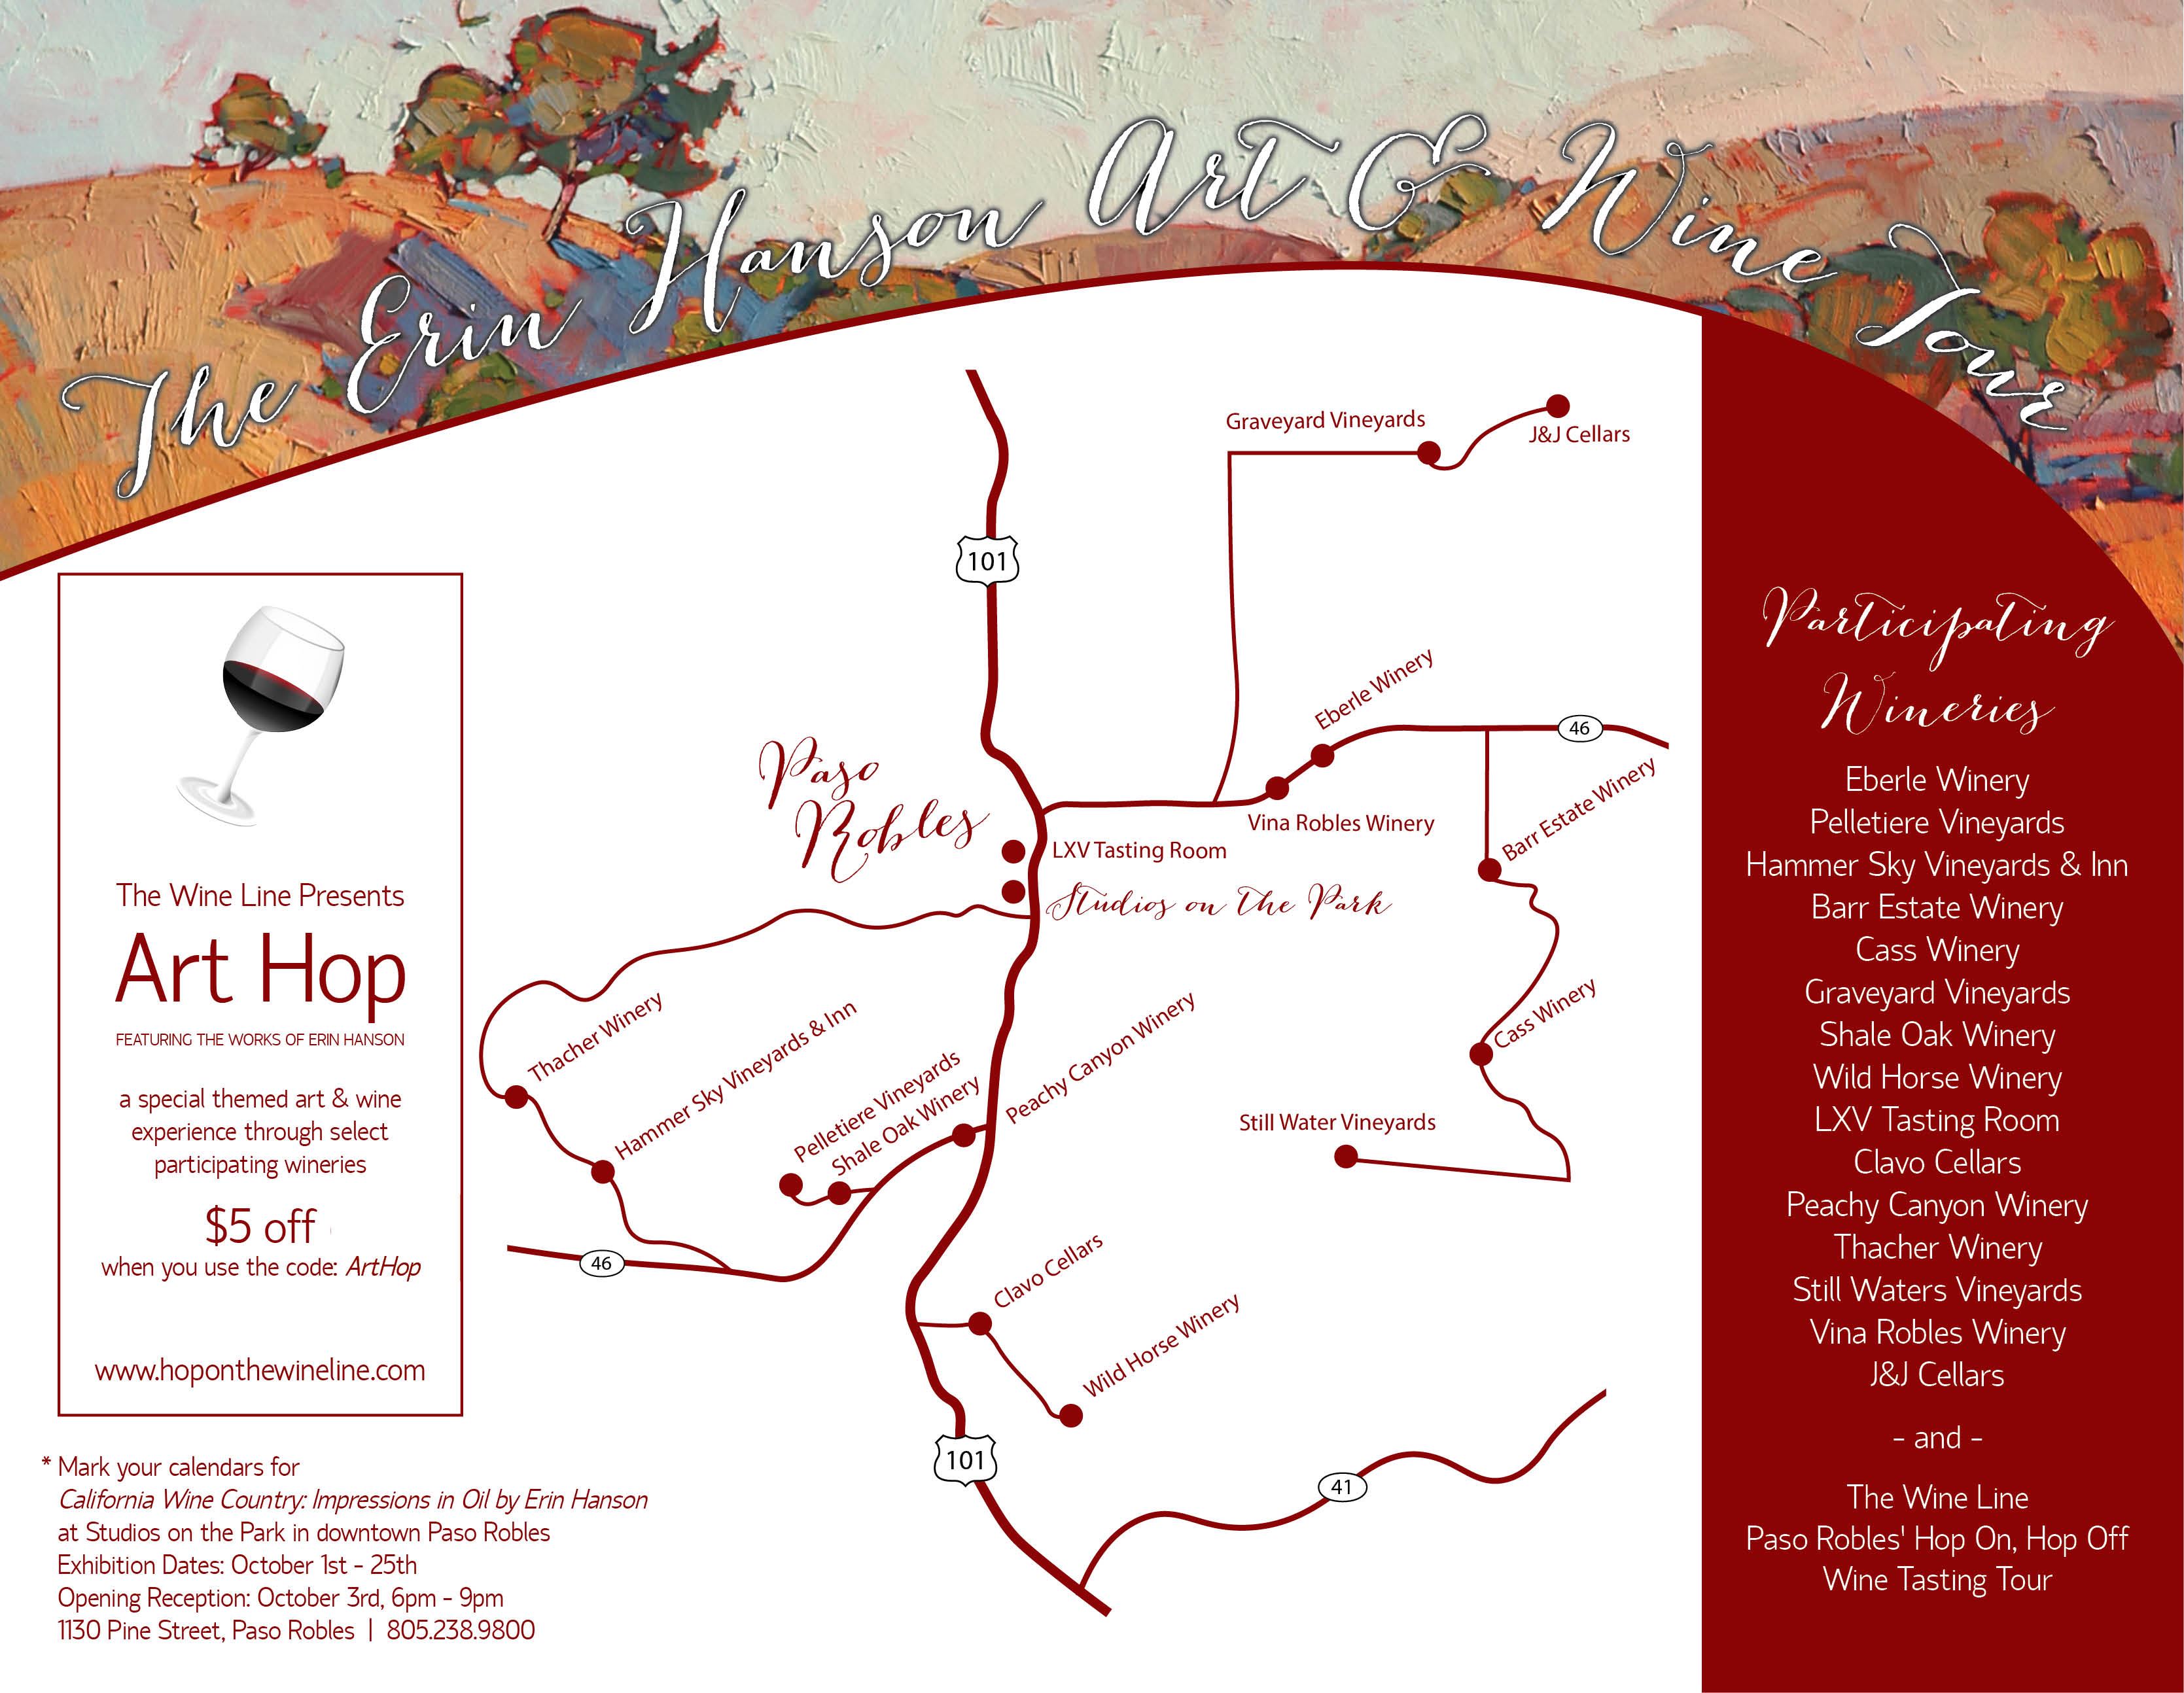 Paso Robles wine country map